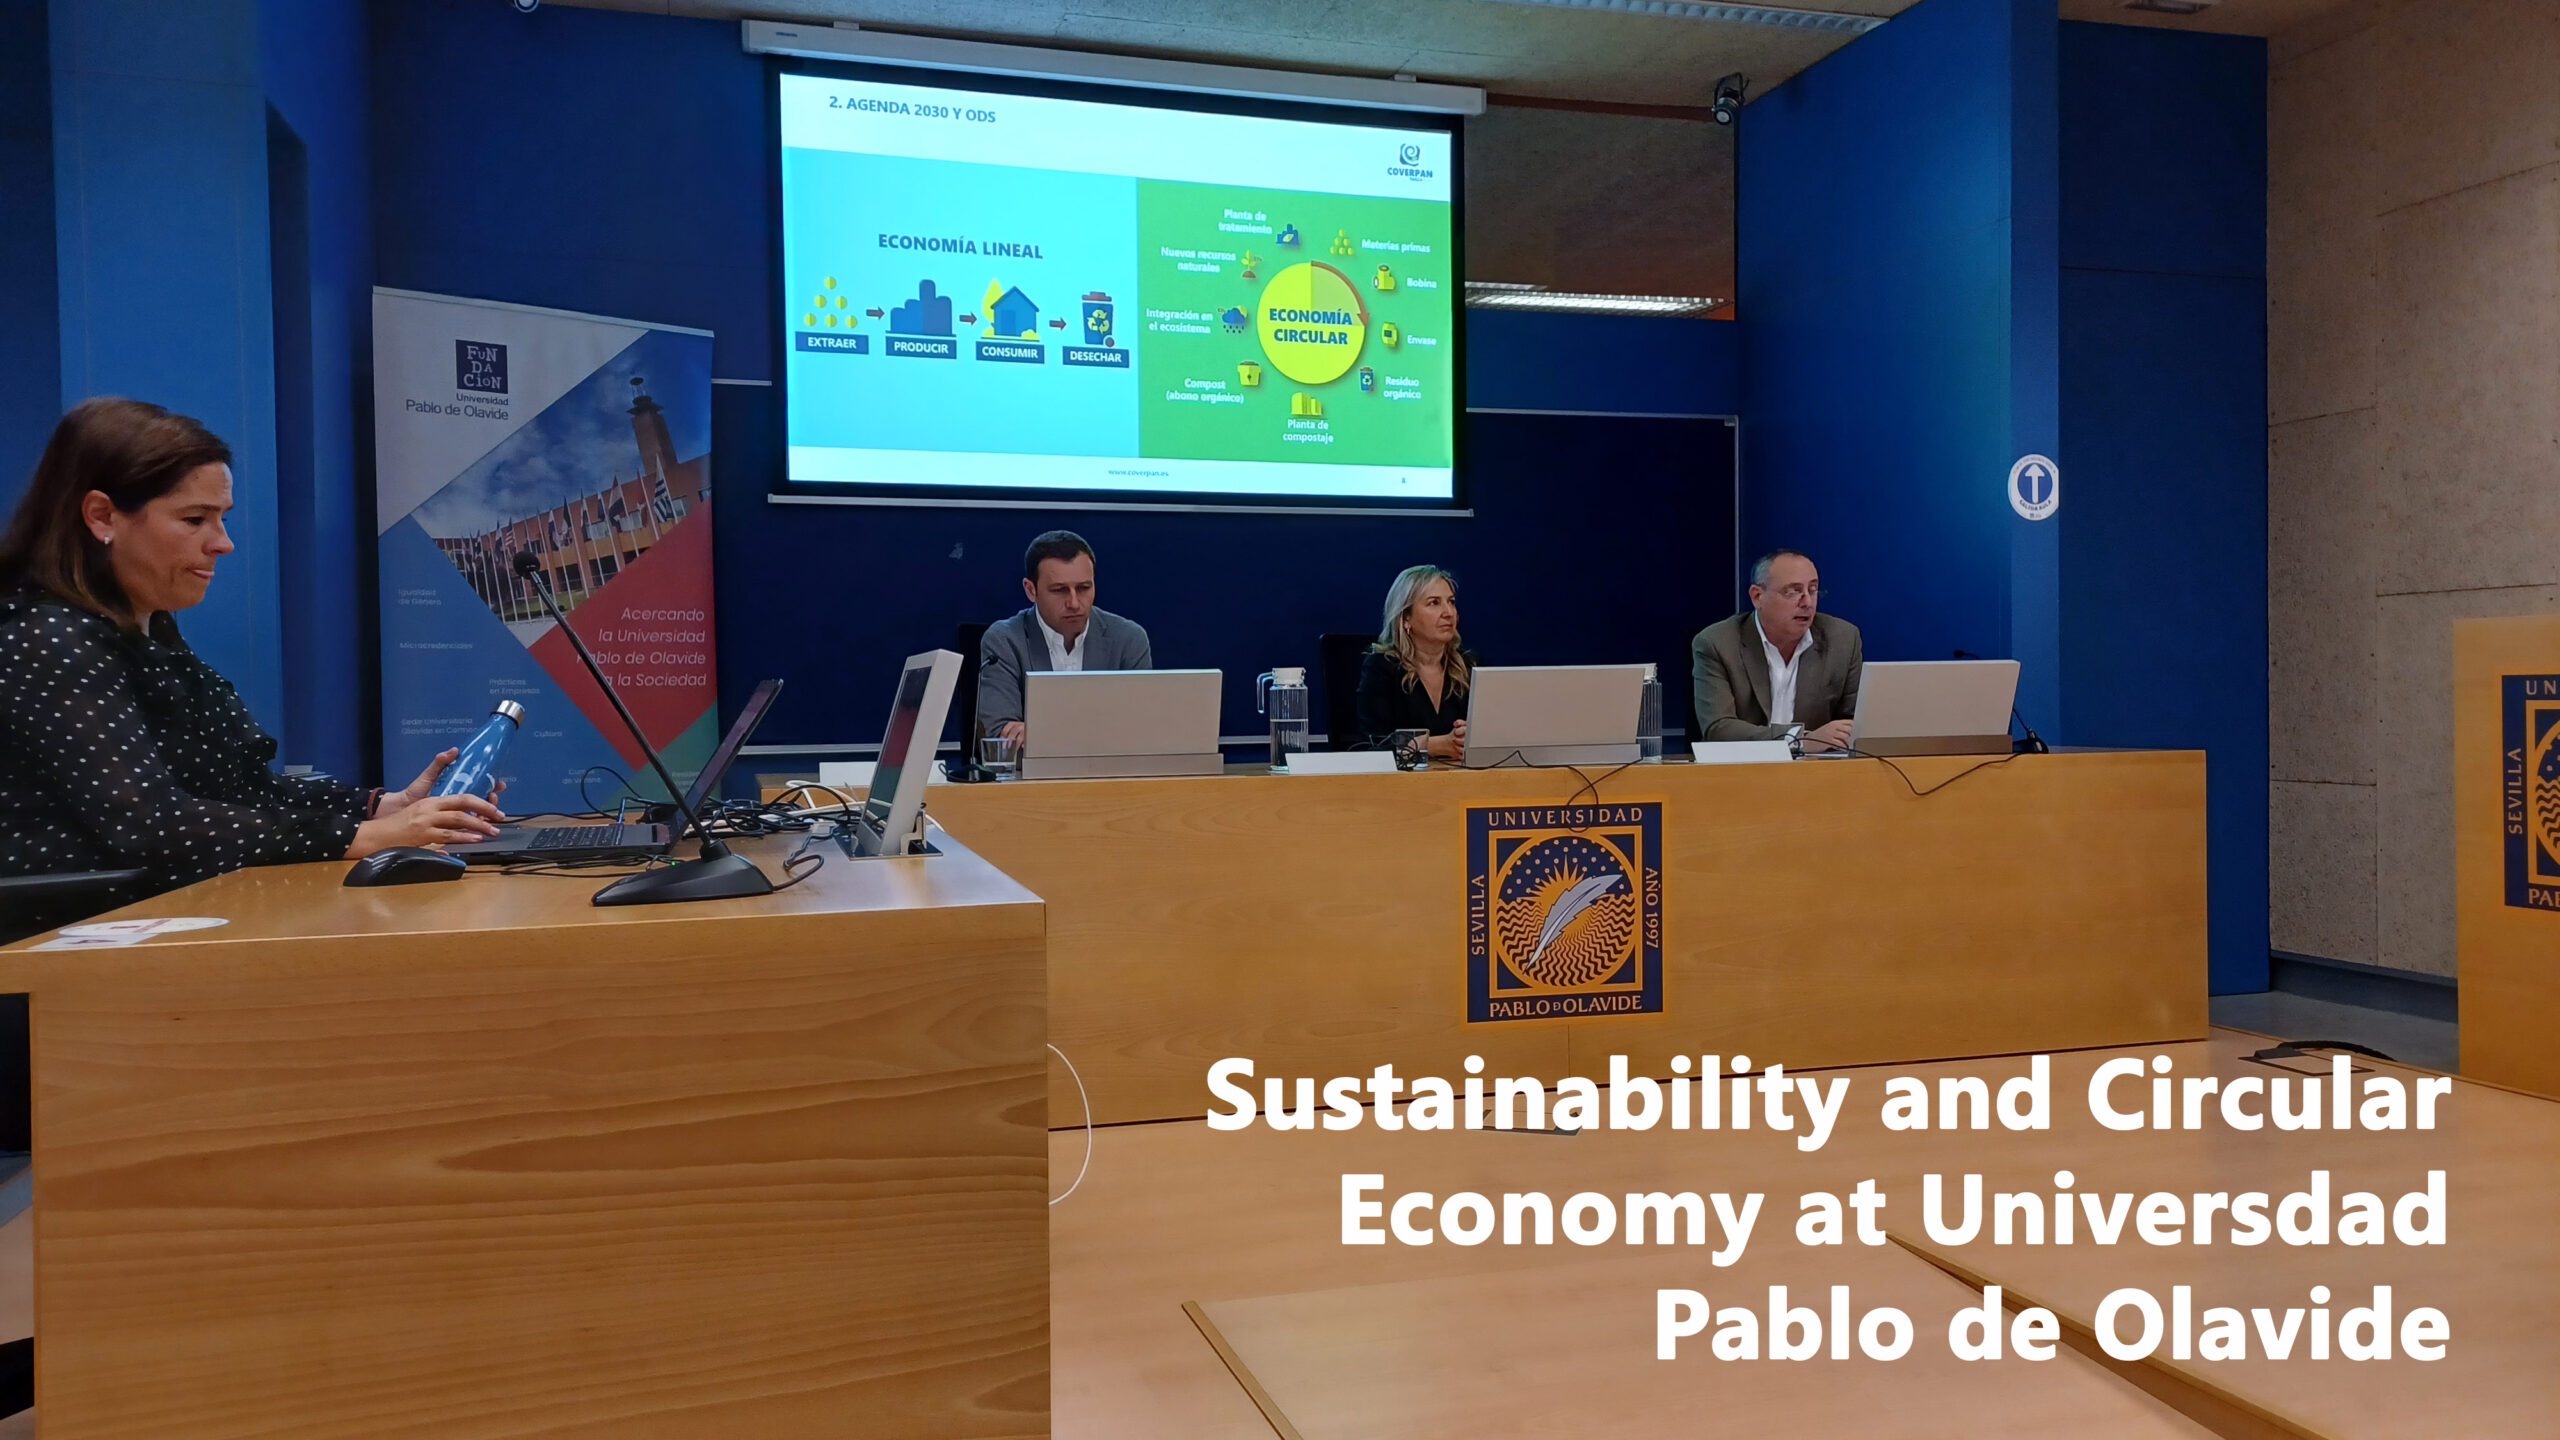 You are currently viewing Conference on Sustainability and Circular Economy at the University Pablo de Olavide